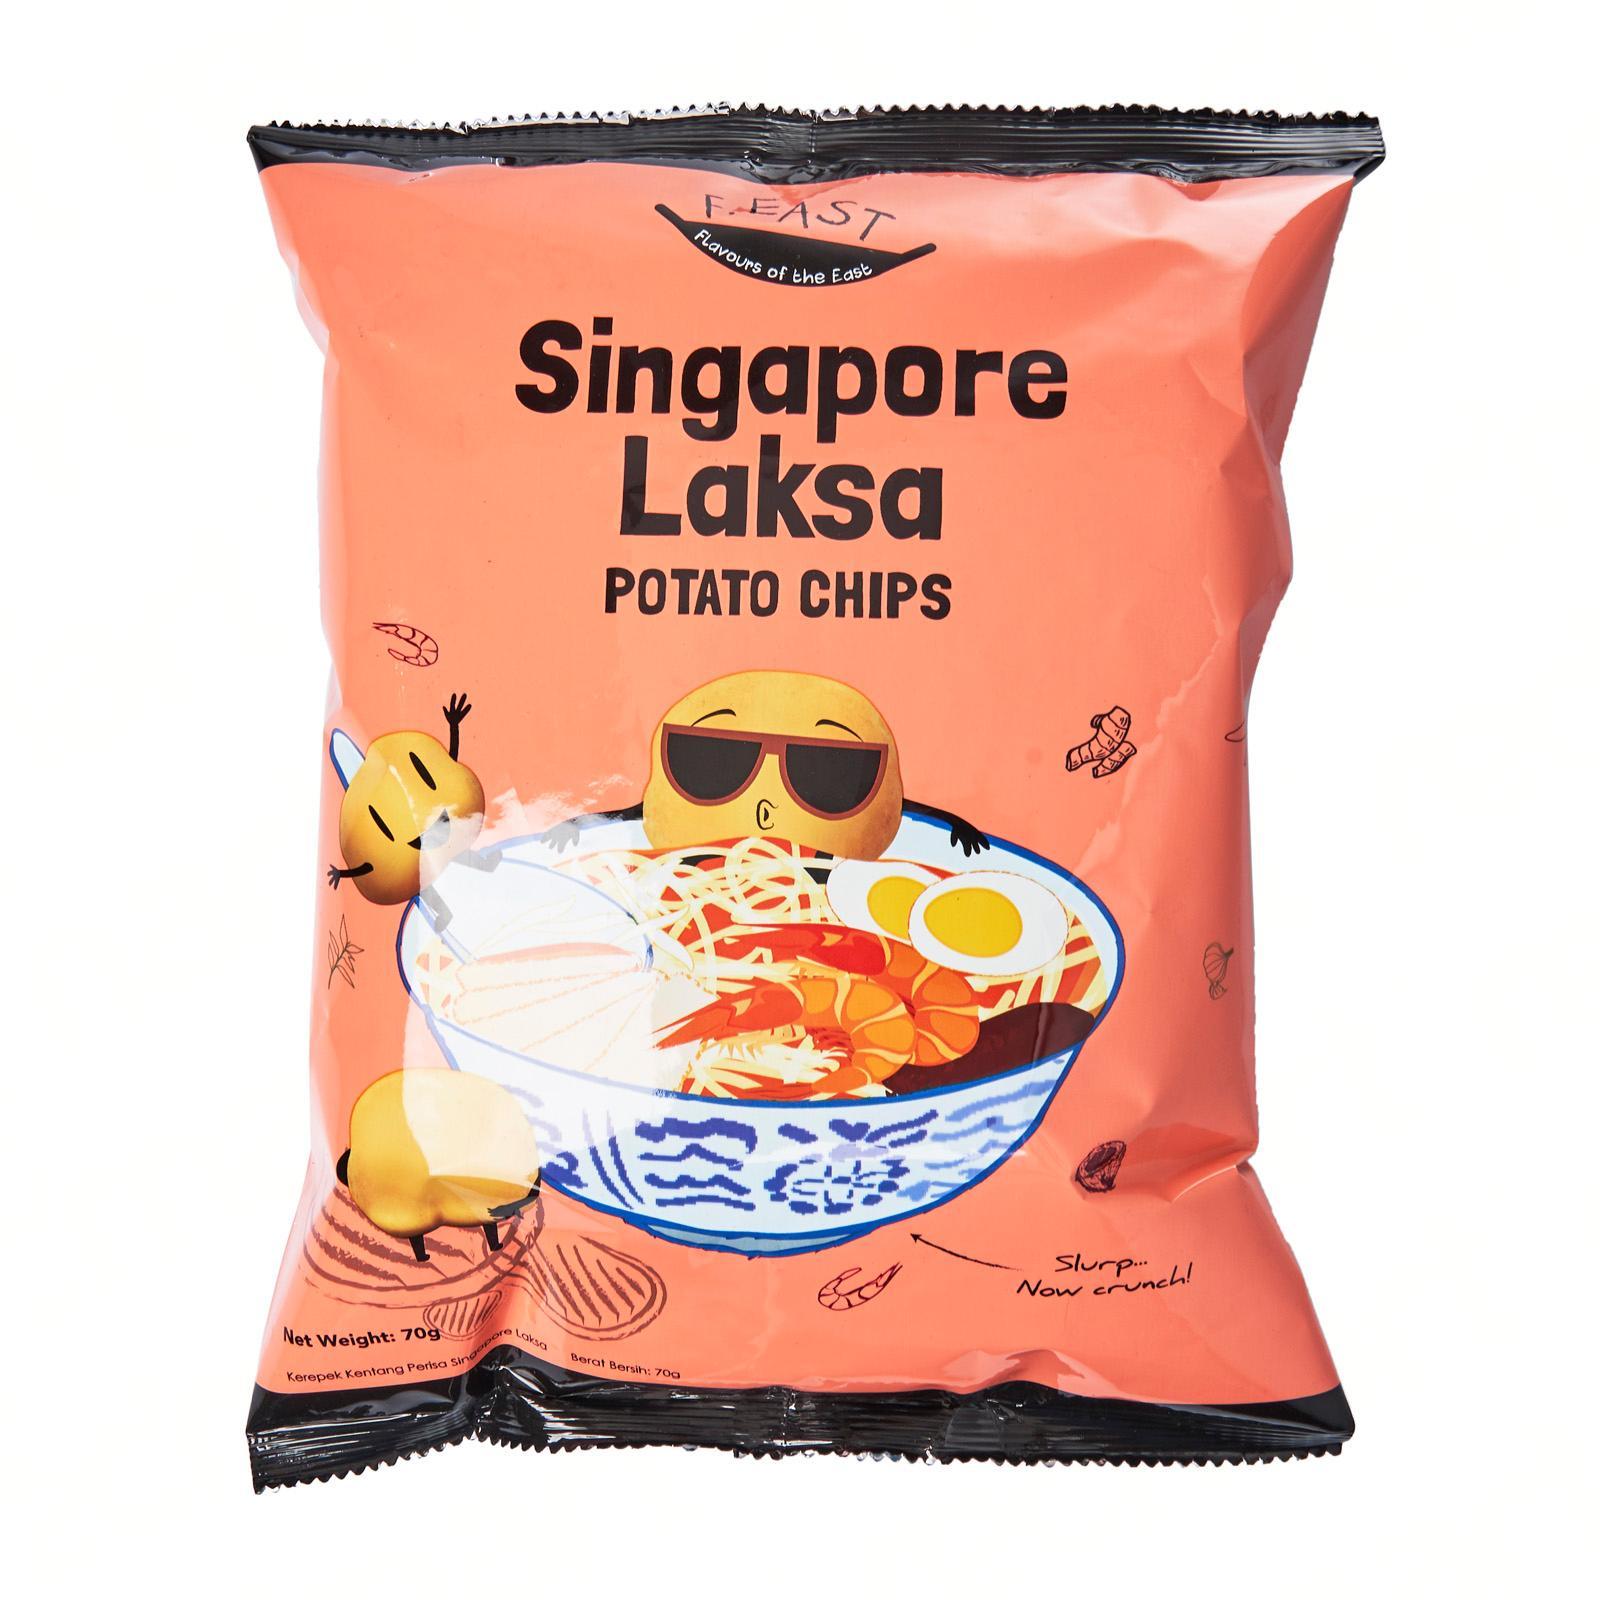 F.EAST Singapore Laksa Potato Chips, What is Singapore famous to buy?, What should I buy from Singapore?, What can you buy only in Singapore?, What souvenirs are found in Singapore?, what to buy in Singapore, must buy in singapore supermarket, best singapore gifts for overseas friends, things to buy in singapore cheap, best things to buy in singapore airport, unique singapore gifts, singapore souvenir shop online,  singapore souvenirs, Singapore snacks to bring home, 